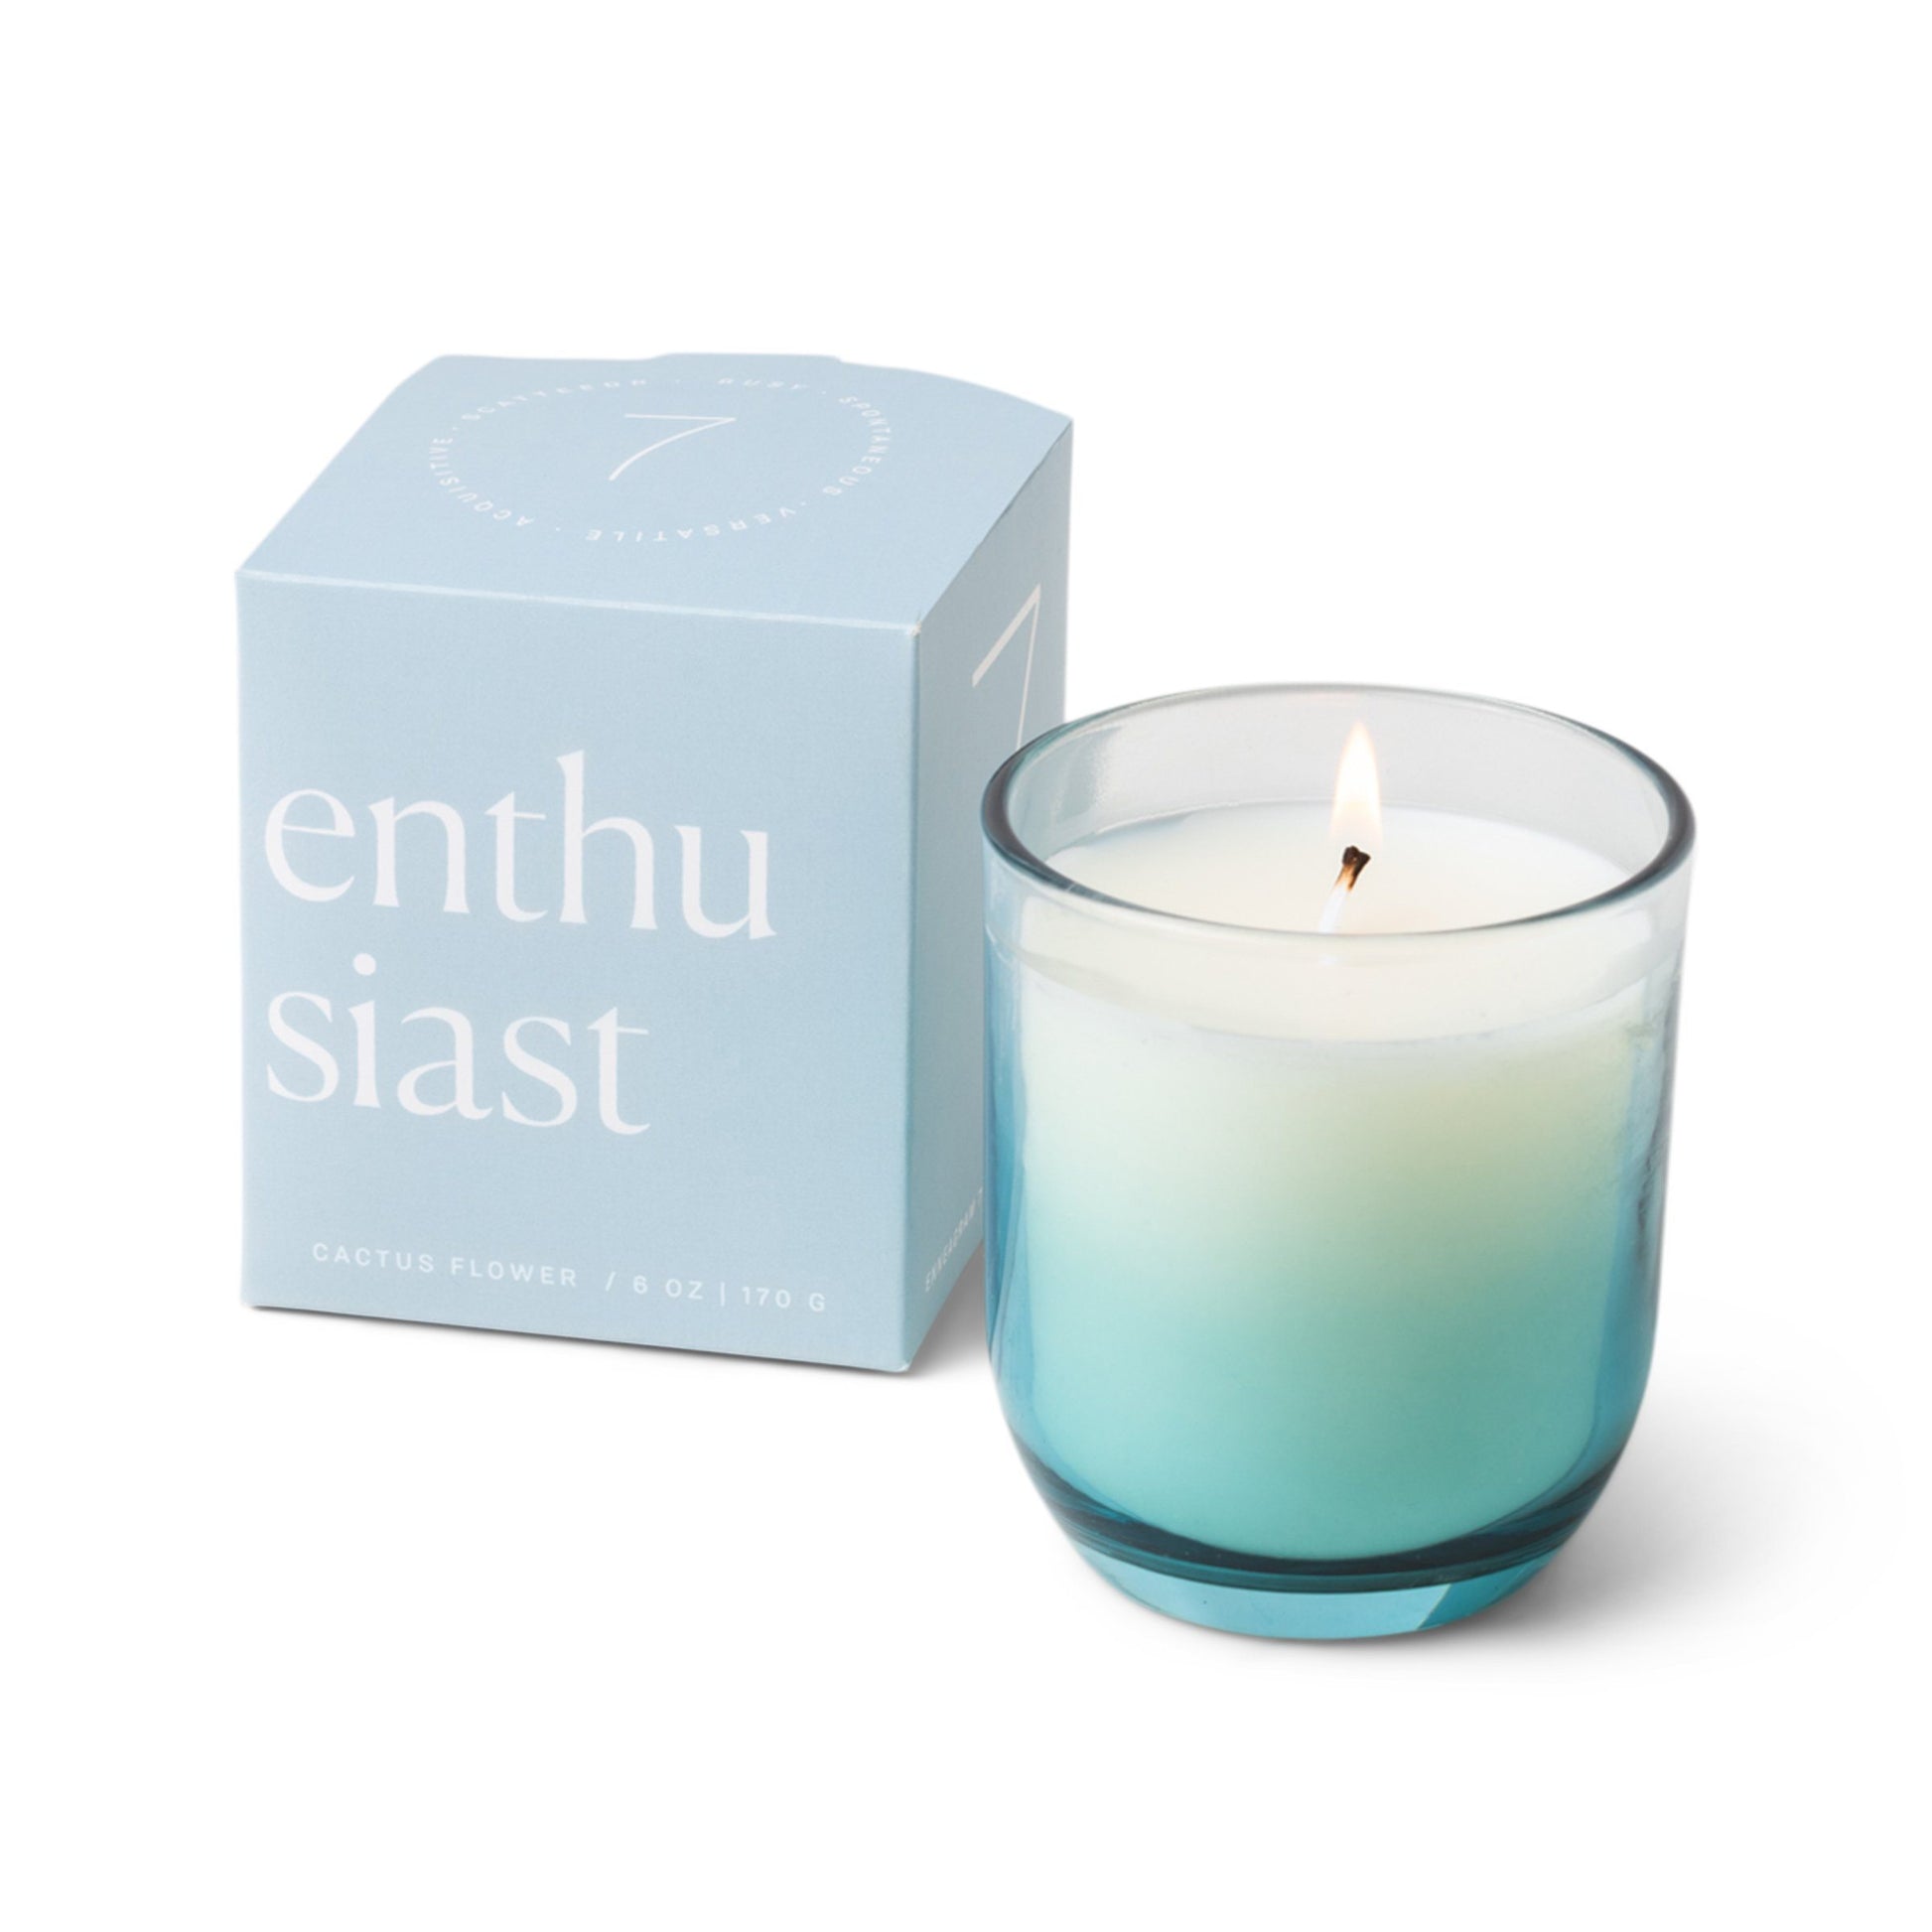 Candle with a vessel of clear glass that fades to turquoise at the bottom; pictured next to the baby blue box which reads “enthusiast”